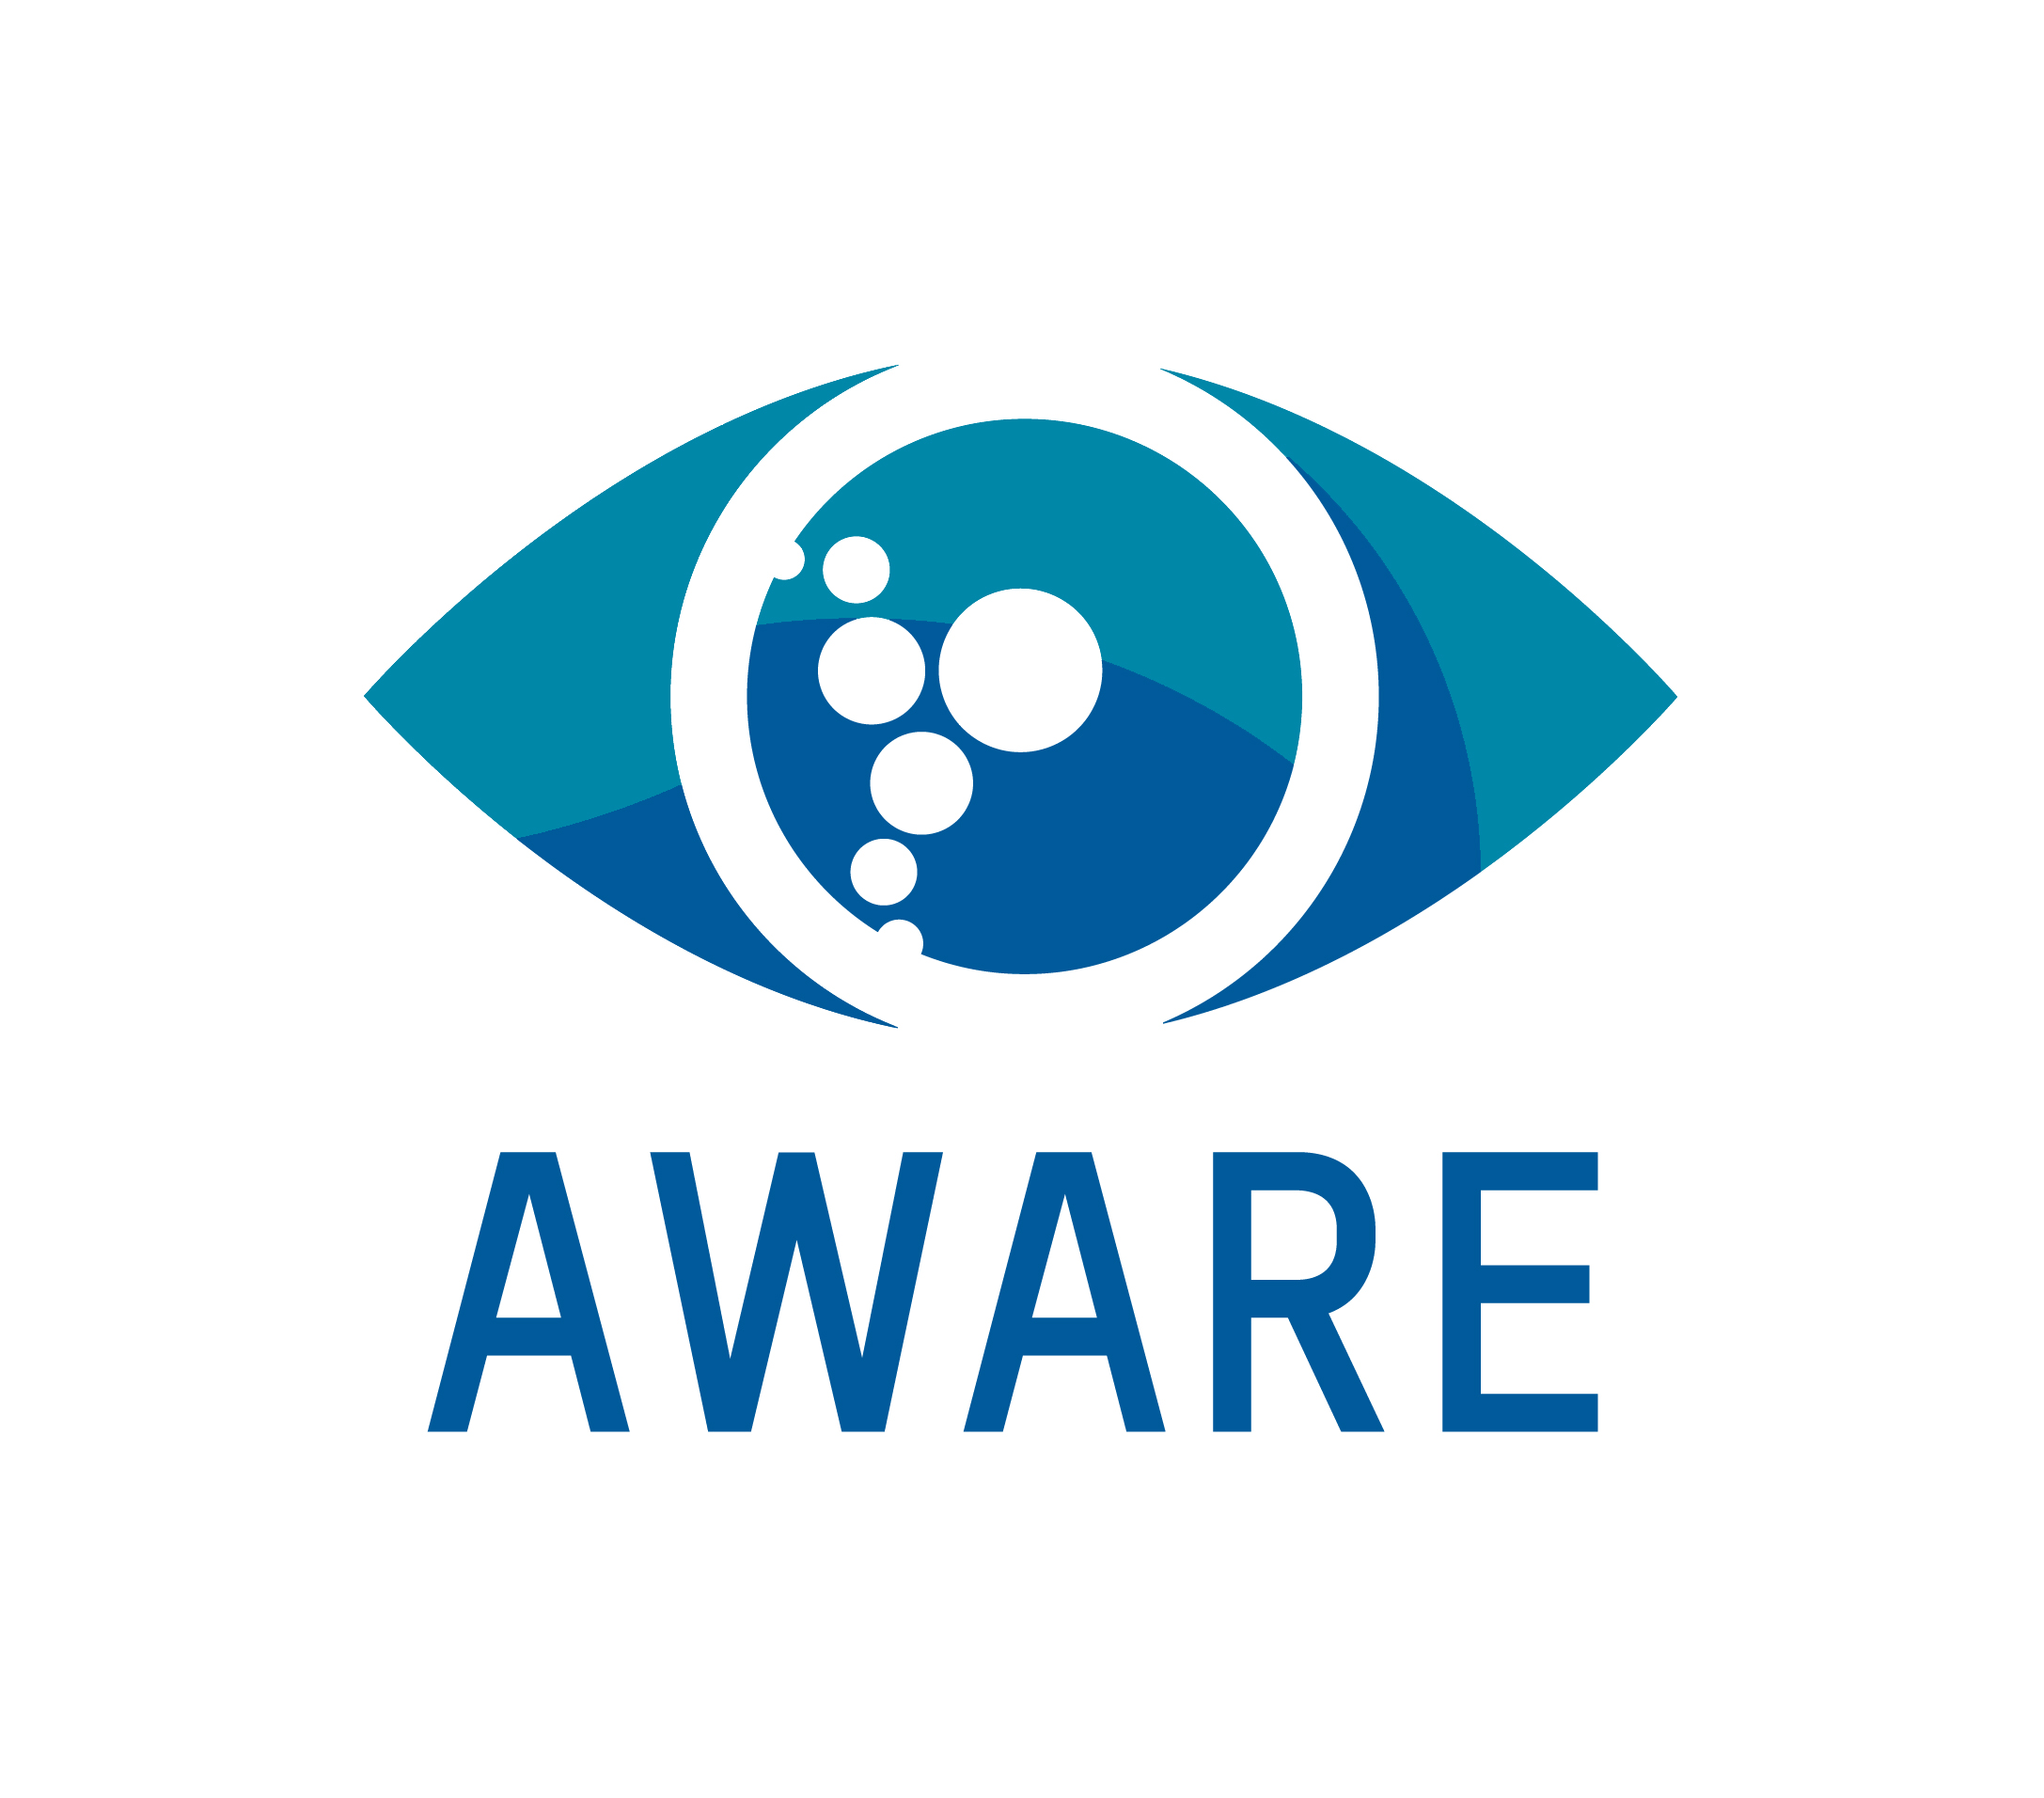 Illustration of the AWARE lettering with an eye in blue and turquoise above it